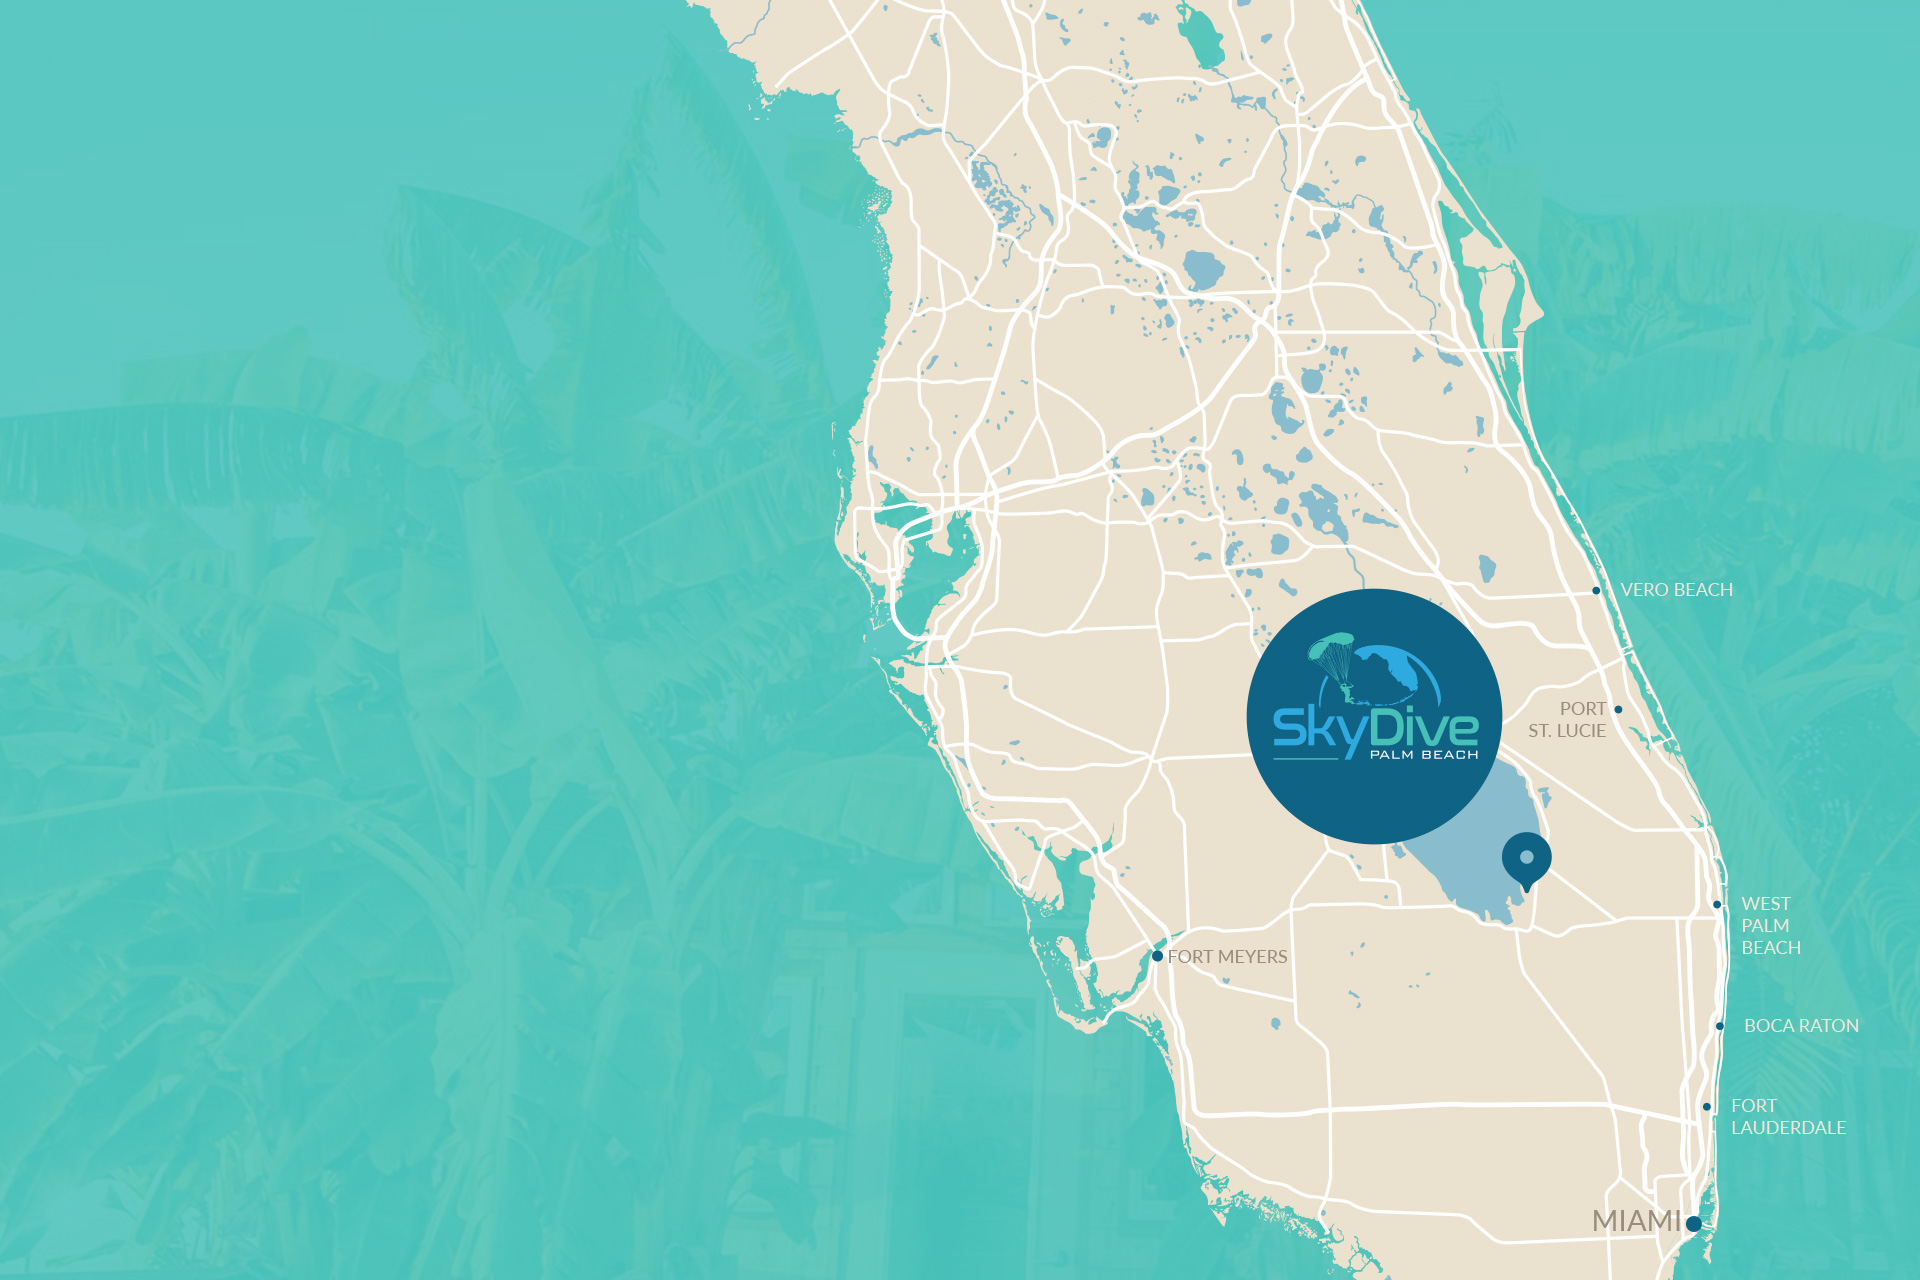 Map of Skydive Palm Beach location in relation to major cities in South Florida